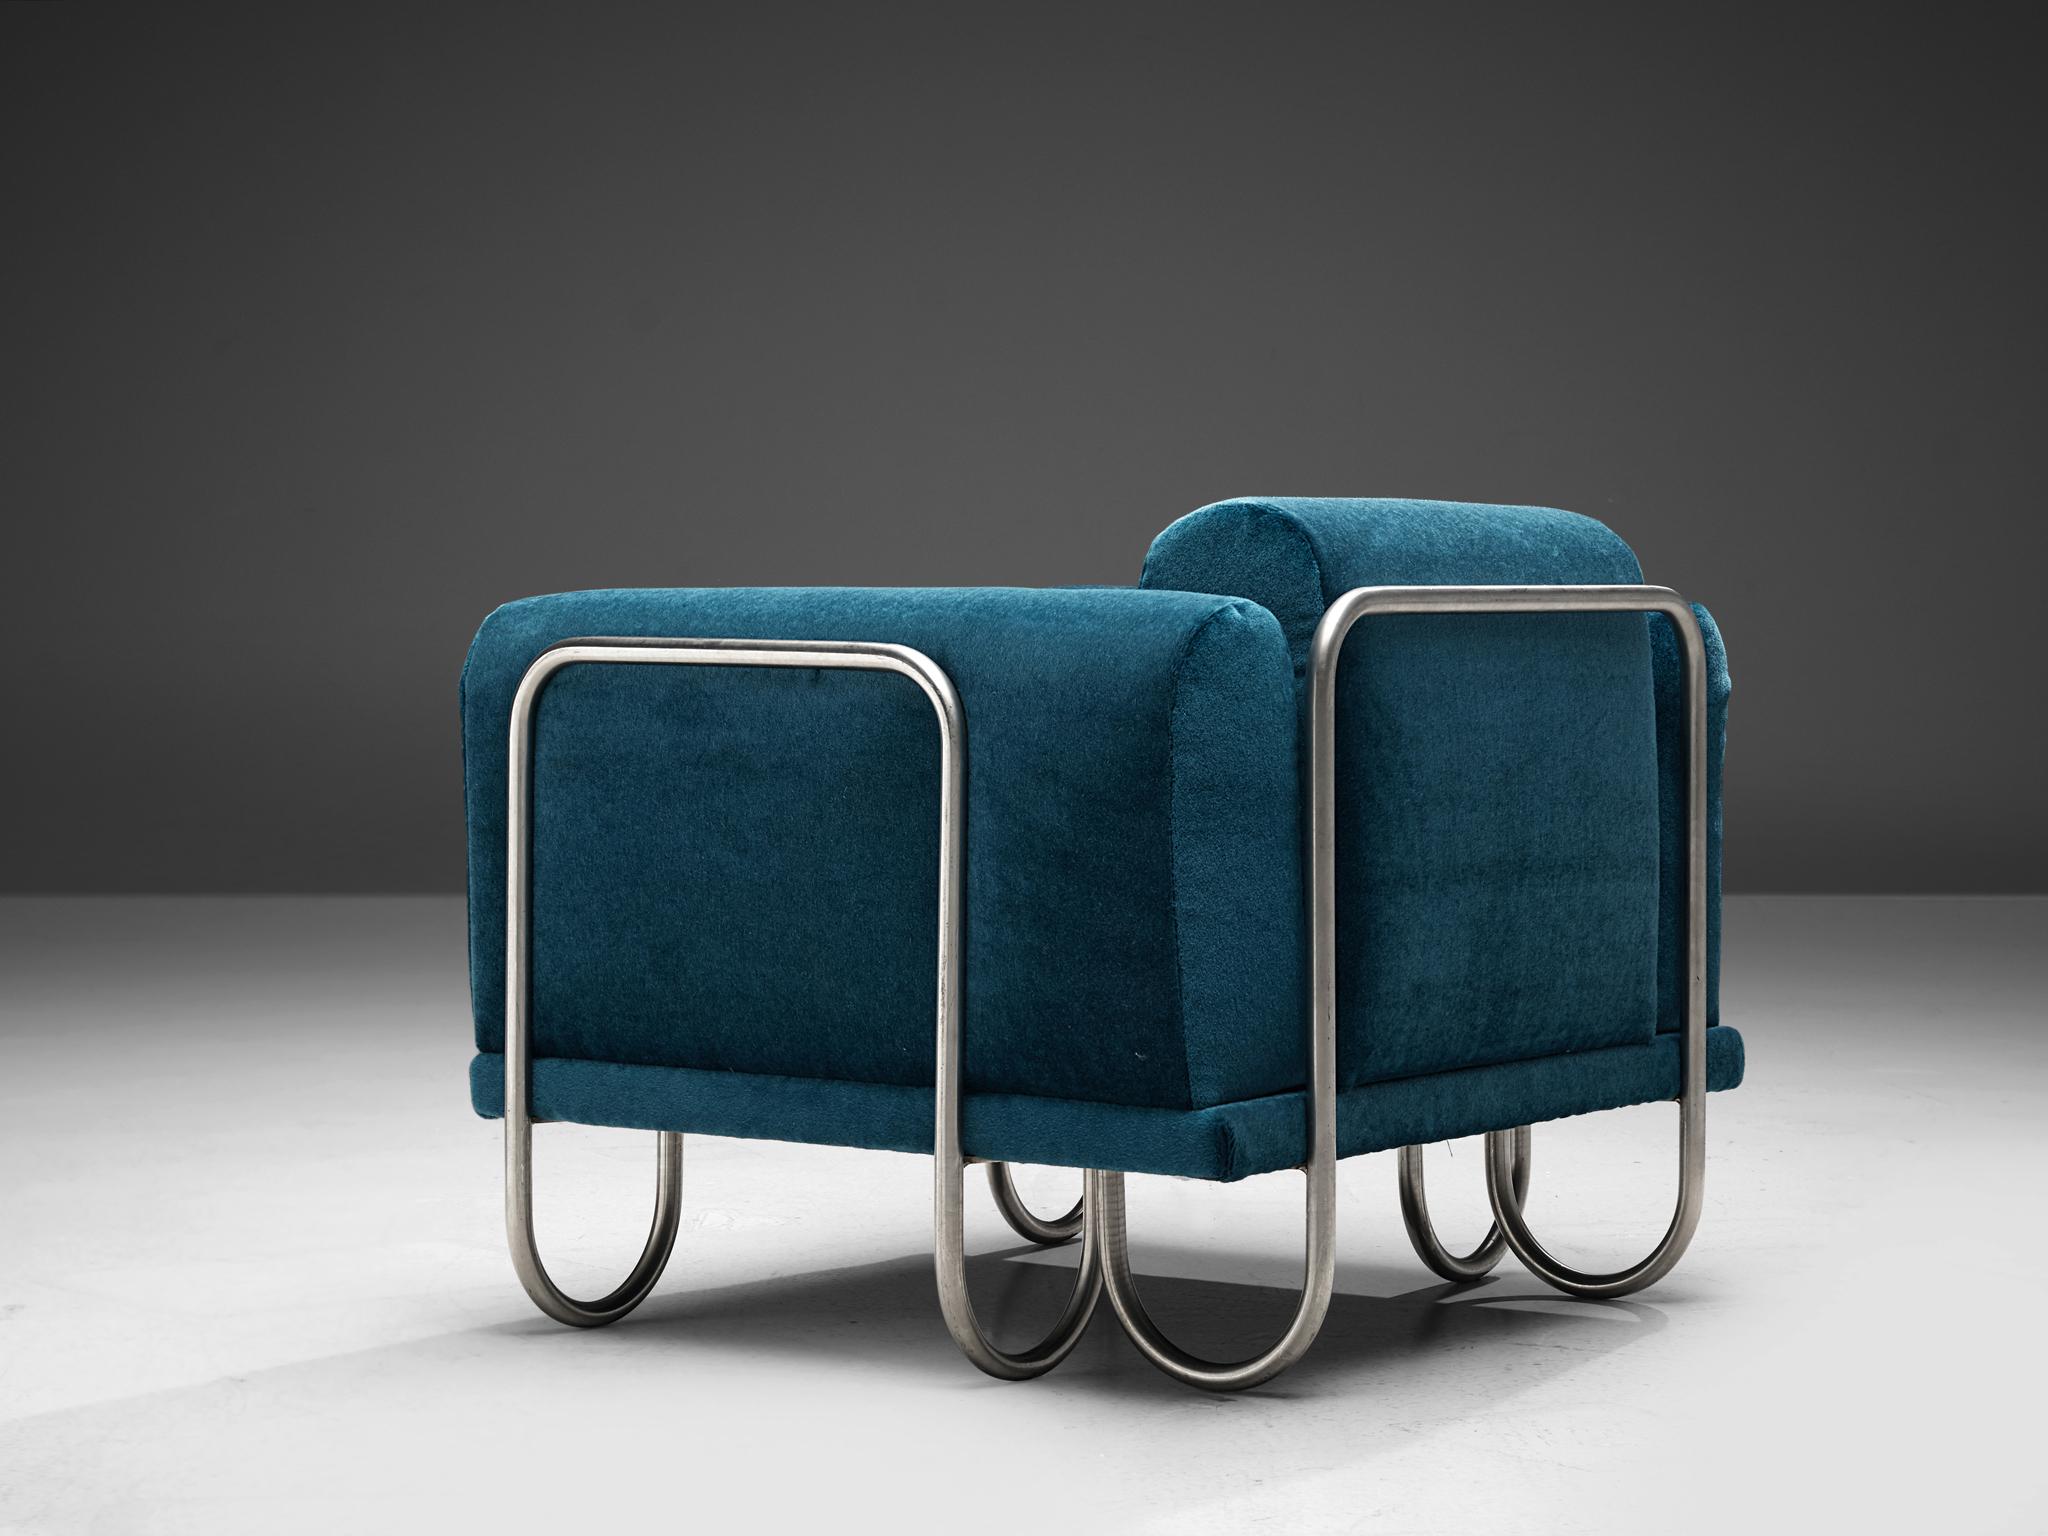 Large set of club chairs, fabric and metal, France, 1970s

A comfortable easy chair that features a curved, chromed tubular frame. The frame appears to be an ongoing curved line, moving upwards to support the cushions and downwards, functioning as